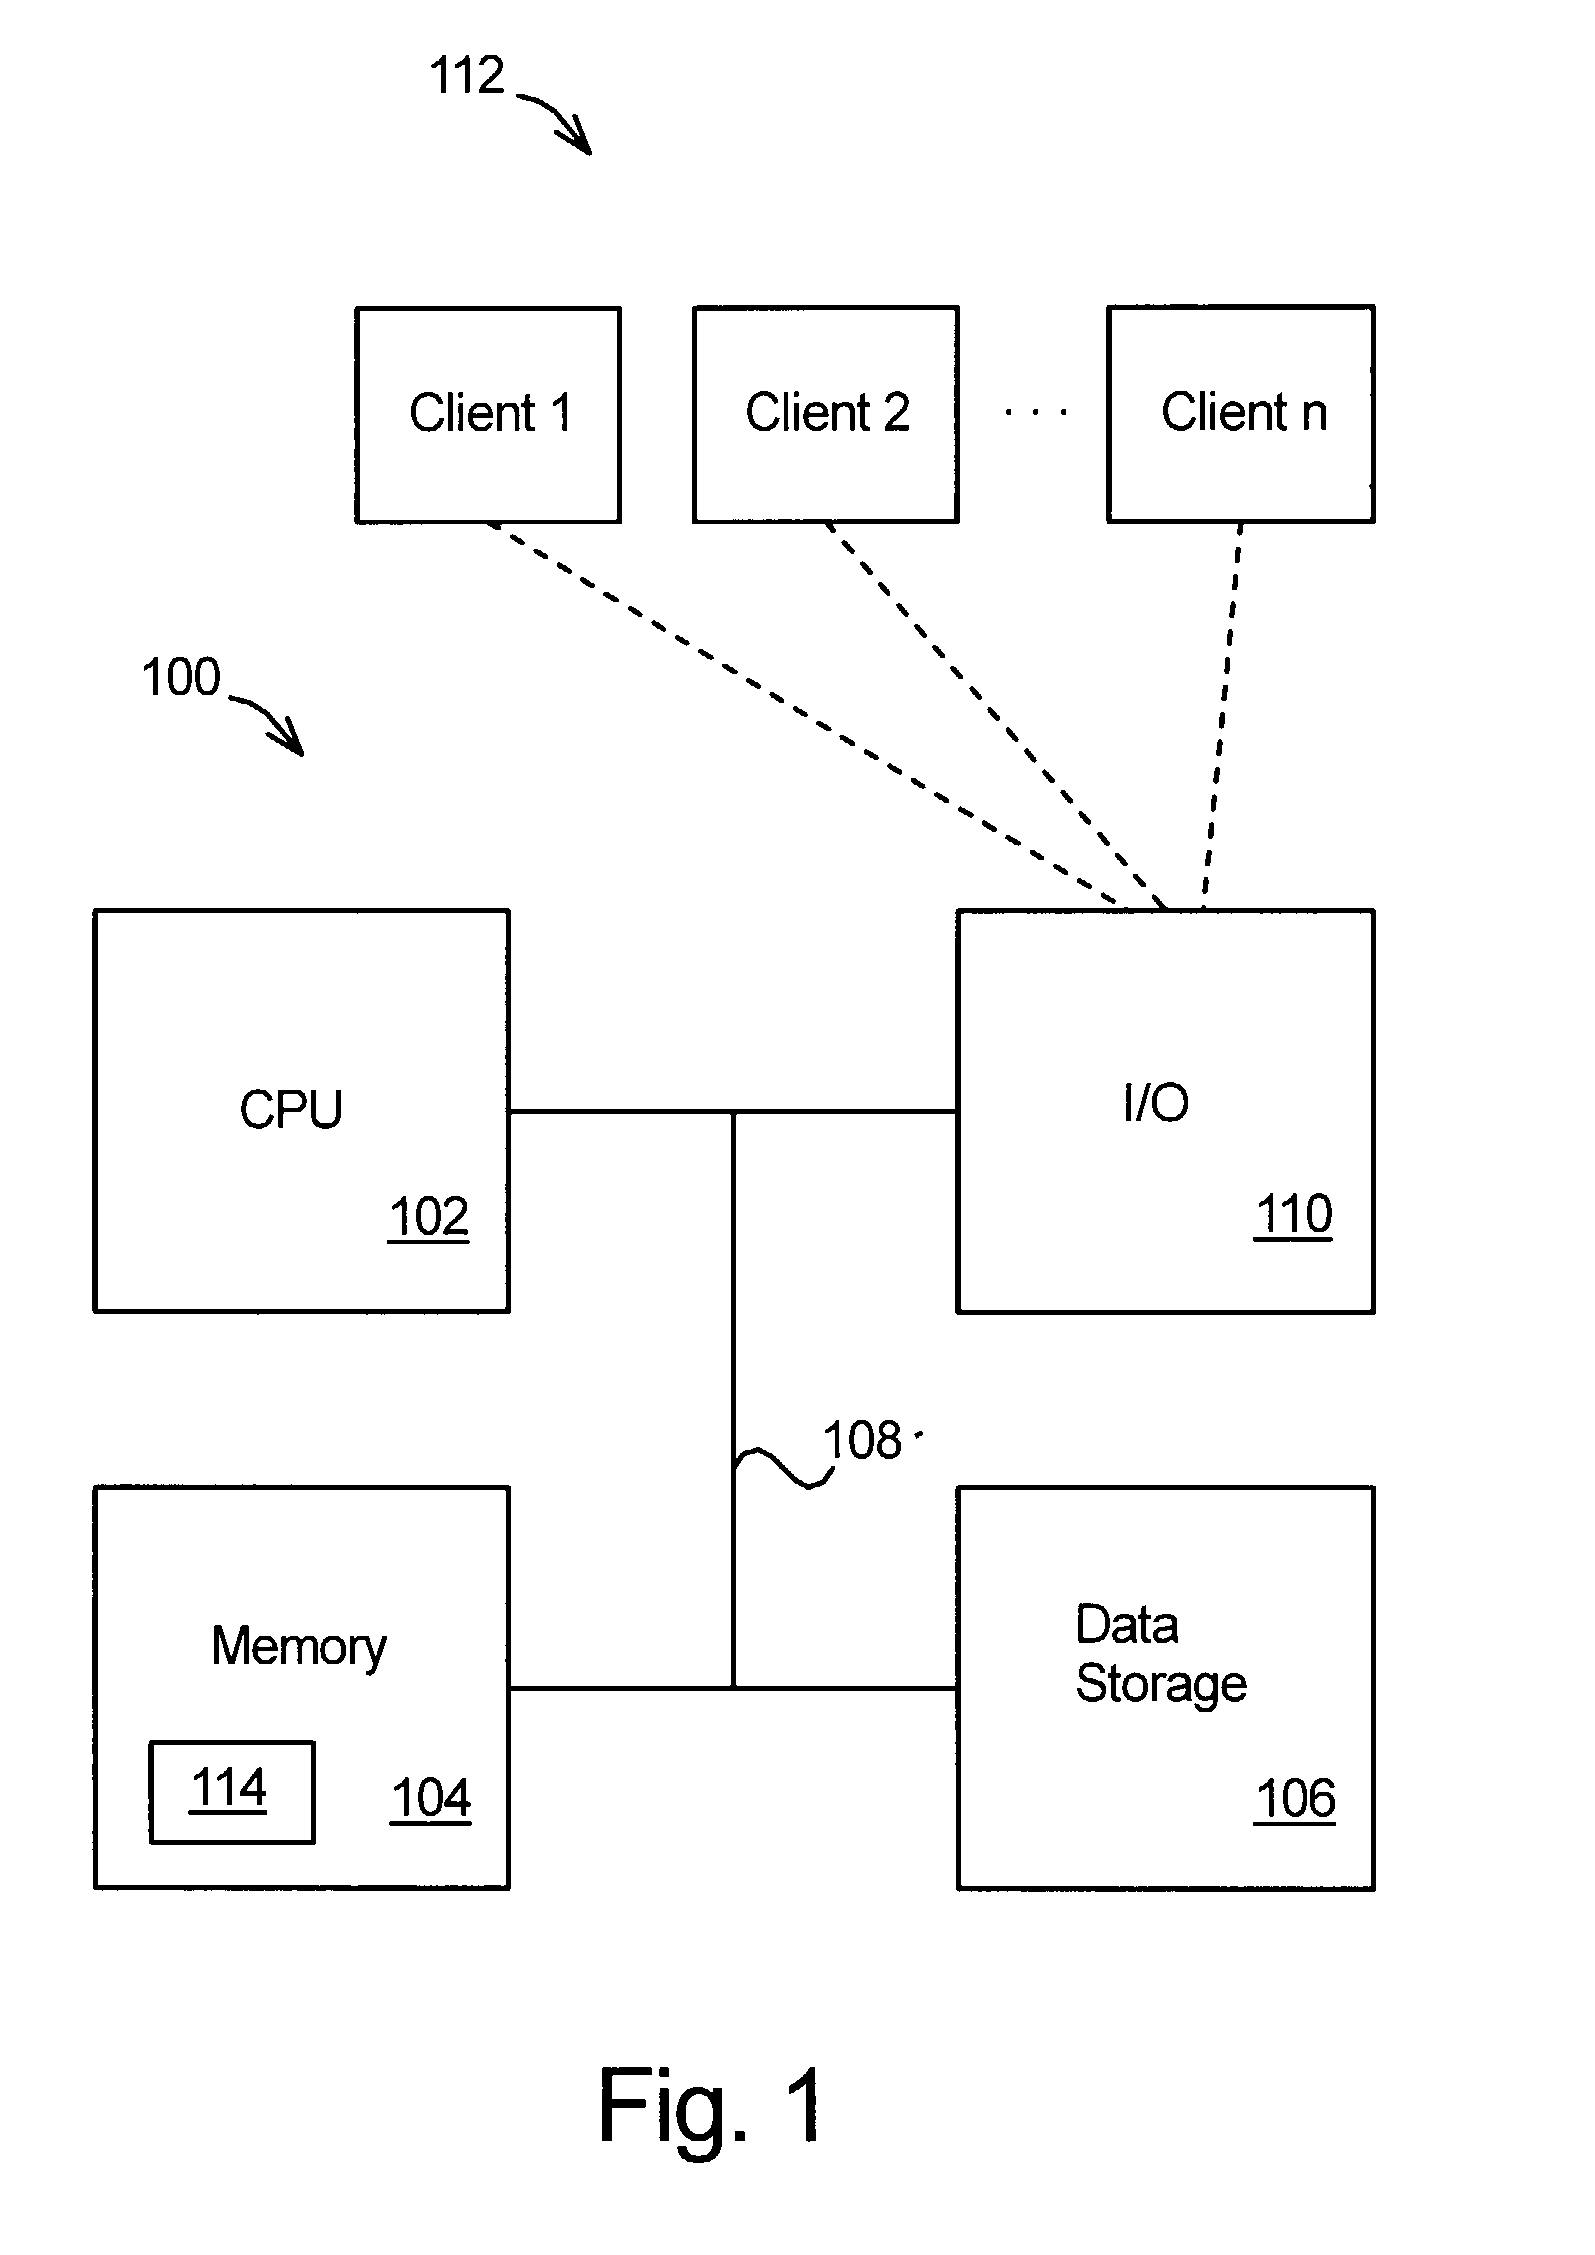 Data storage using disk drives in accordance with a schedule of operations